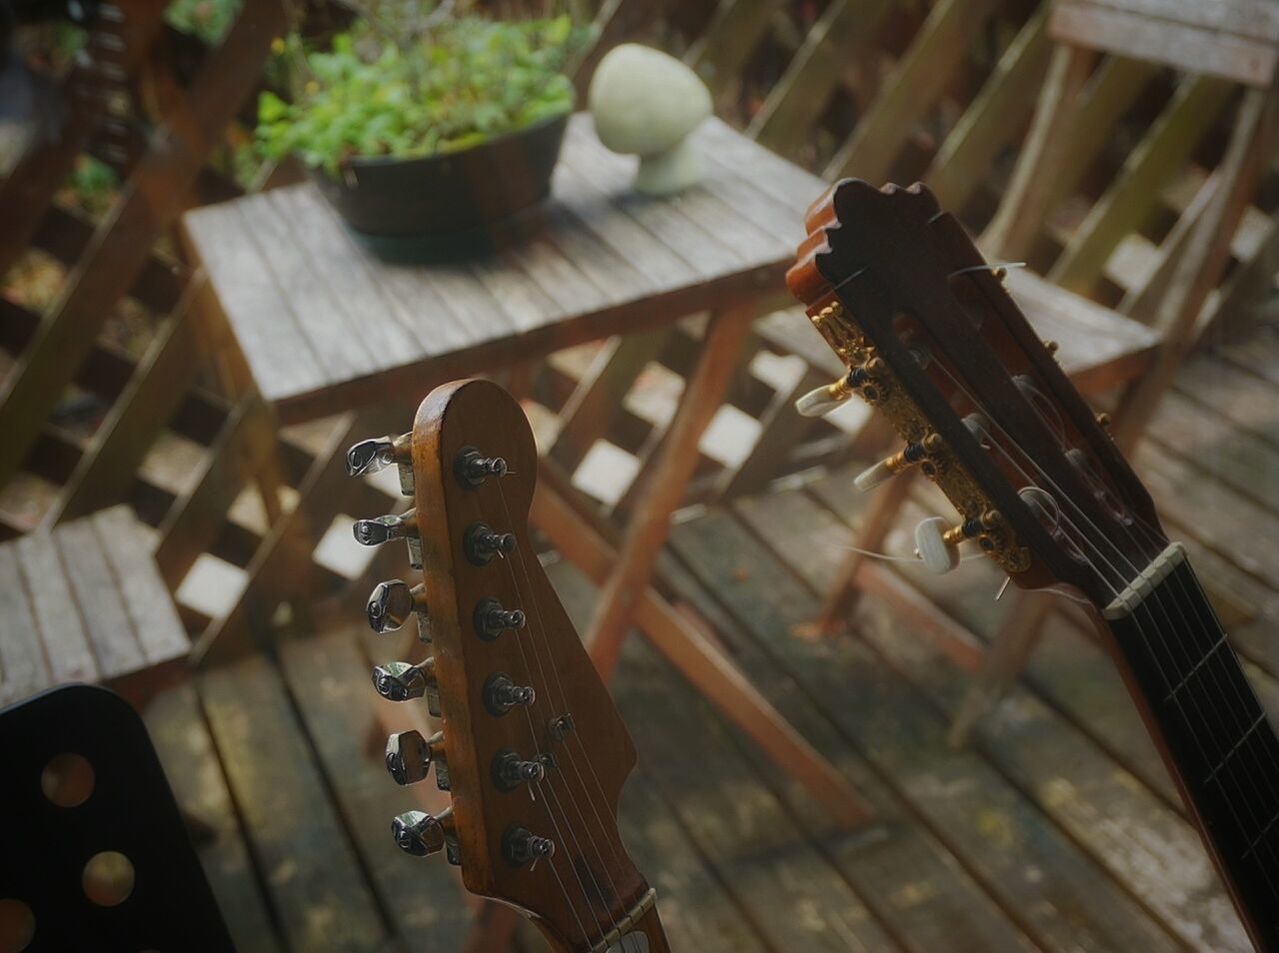 CLOSE-UP OF GUITAR ON FLOOR